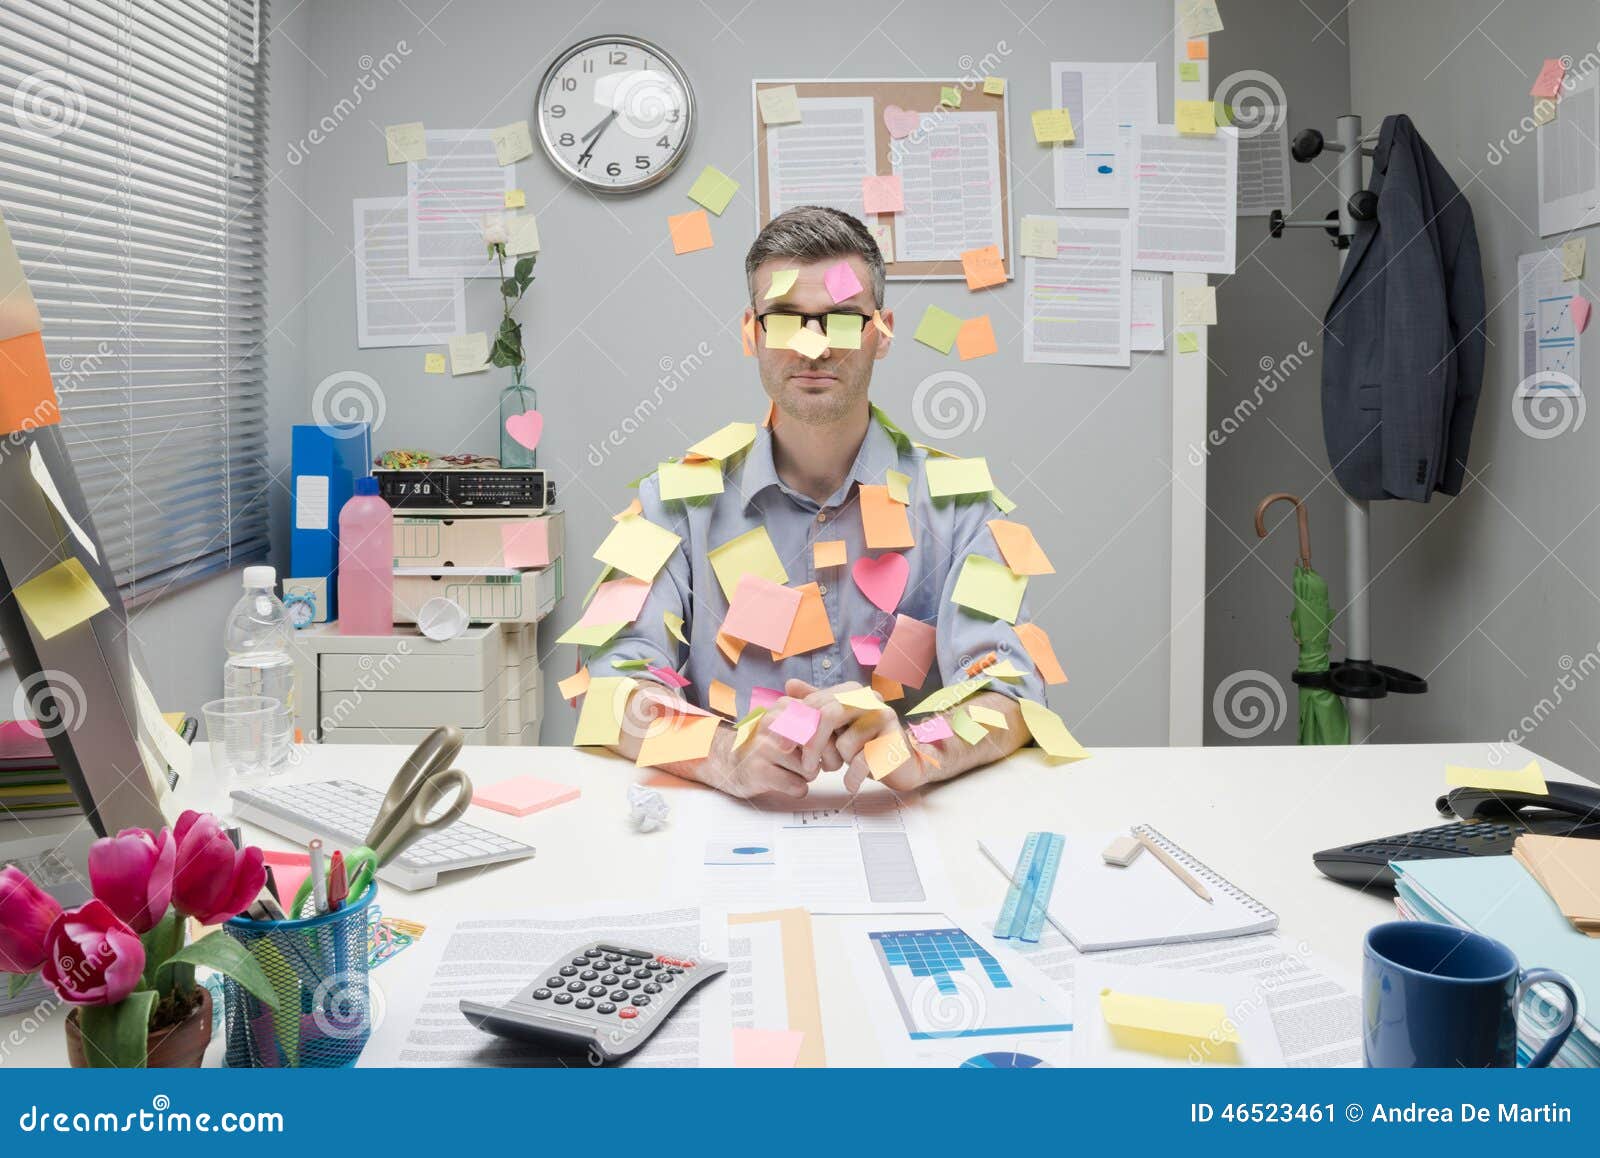 office worker covered with stick notes